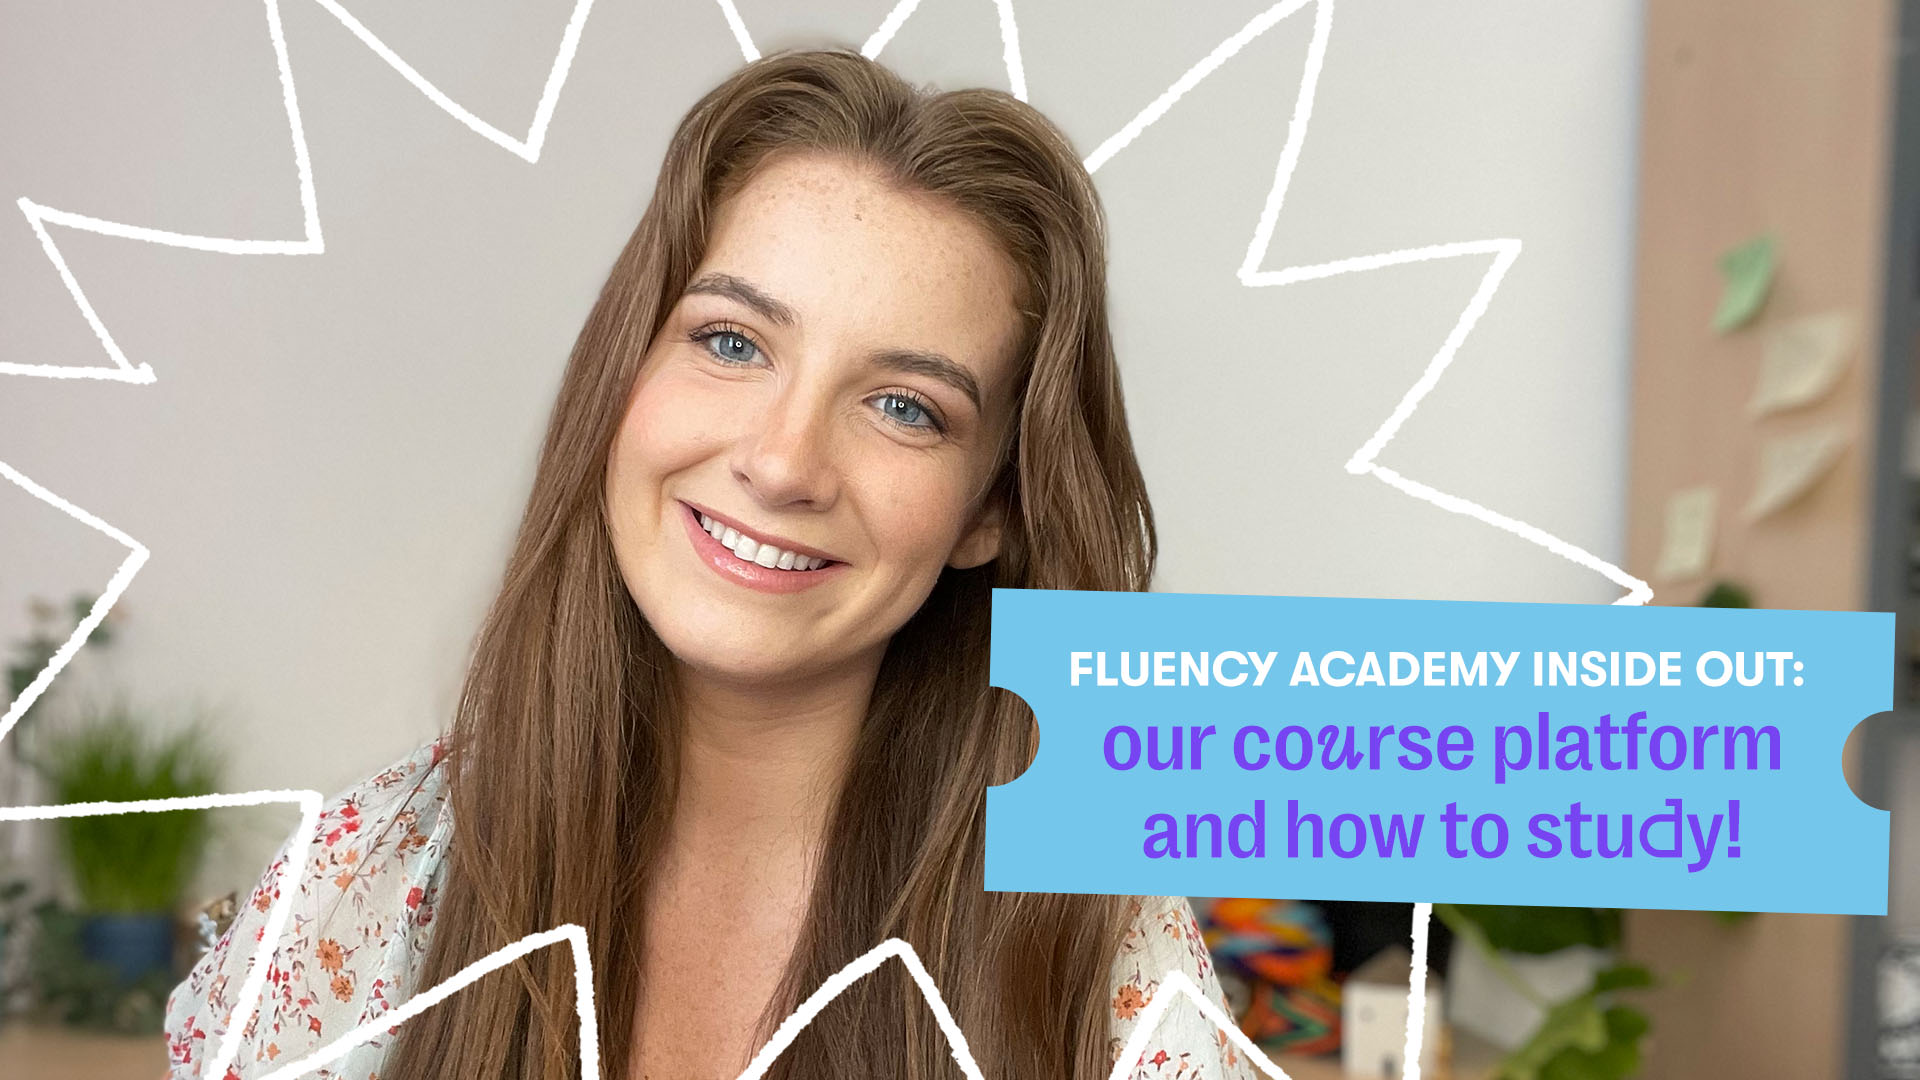 Fluency Academy inside out: our course platform and how to study!